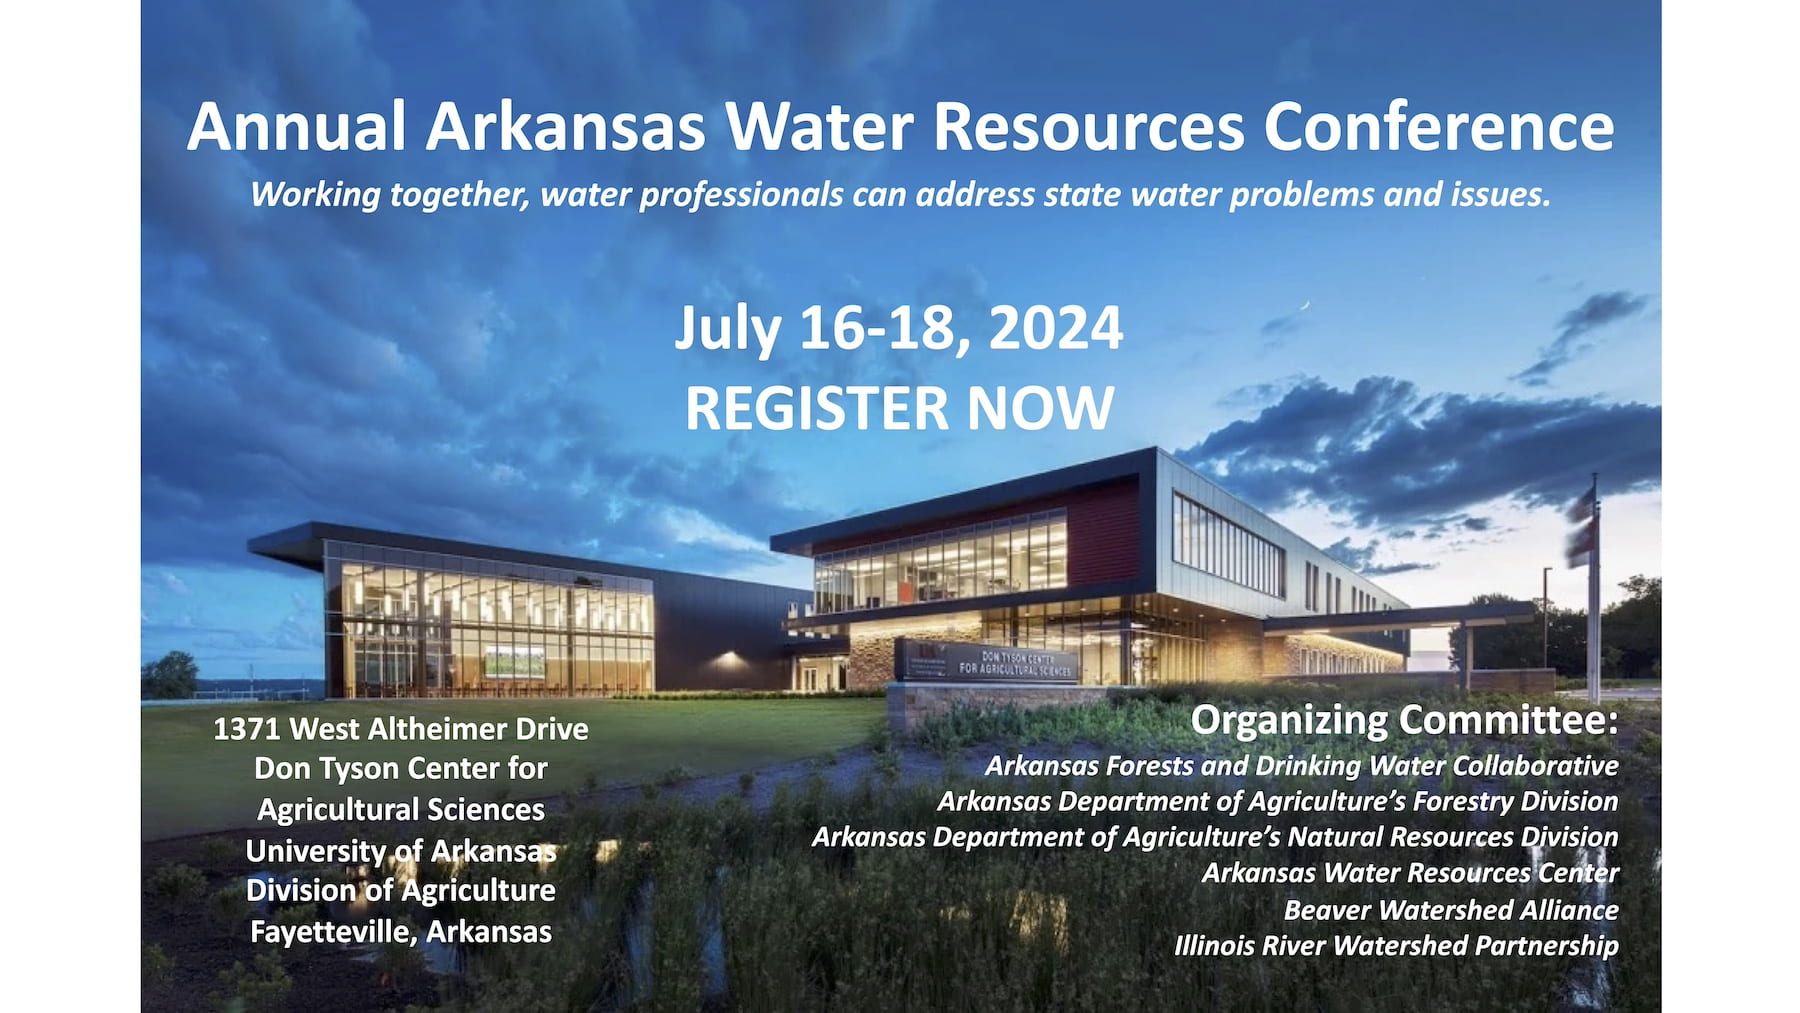 Annual Arkansas Water Resources Conference Working together, water professionals can address state water problems and issues. July 16-18, 2024 REGISTER NOW 1371 West Altheimer Drive Don Tyson Center for Agricultural Sciences University of Arkansas Division of Agriculture Fayetteville Arkansas Organizing Committee: Arkansas Forests and Drinking Water Collaborative, Arkansas Department of Agriculture's Forestry Division, Arkansas Department of Agriculture's Natural Resources Division, Arkansas Water Resources Center, Beaver Watershed Alliance, Illinois River Watershed Partnership